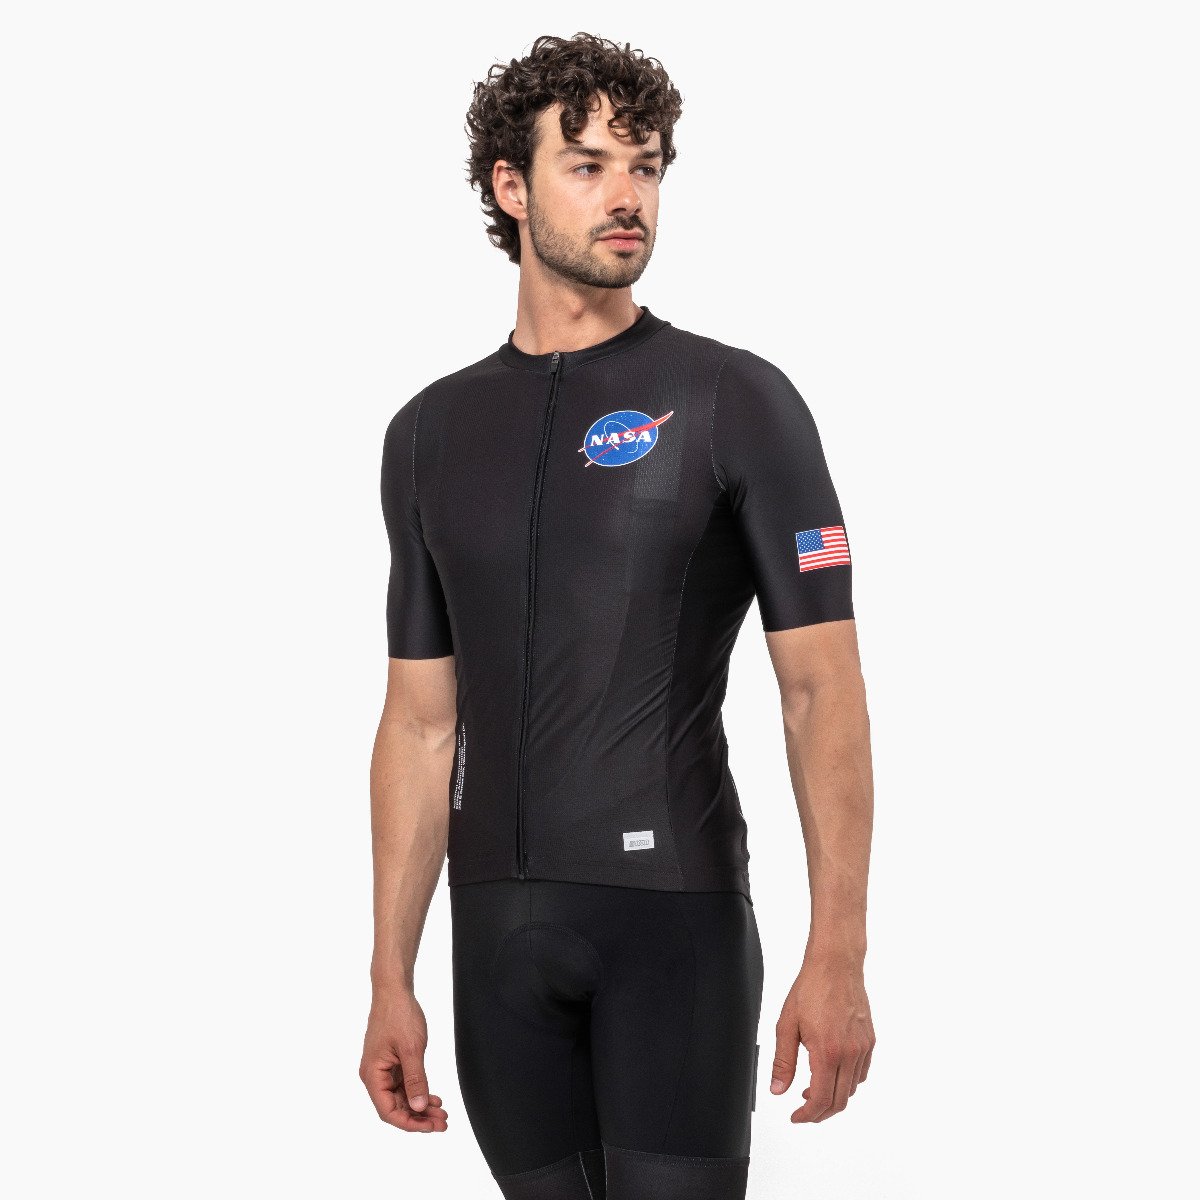 MAGLIA CICLISMO X-OVER - SPACE AGENCY 18